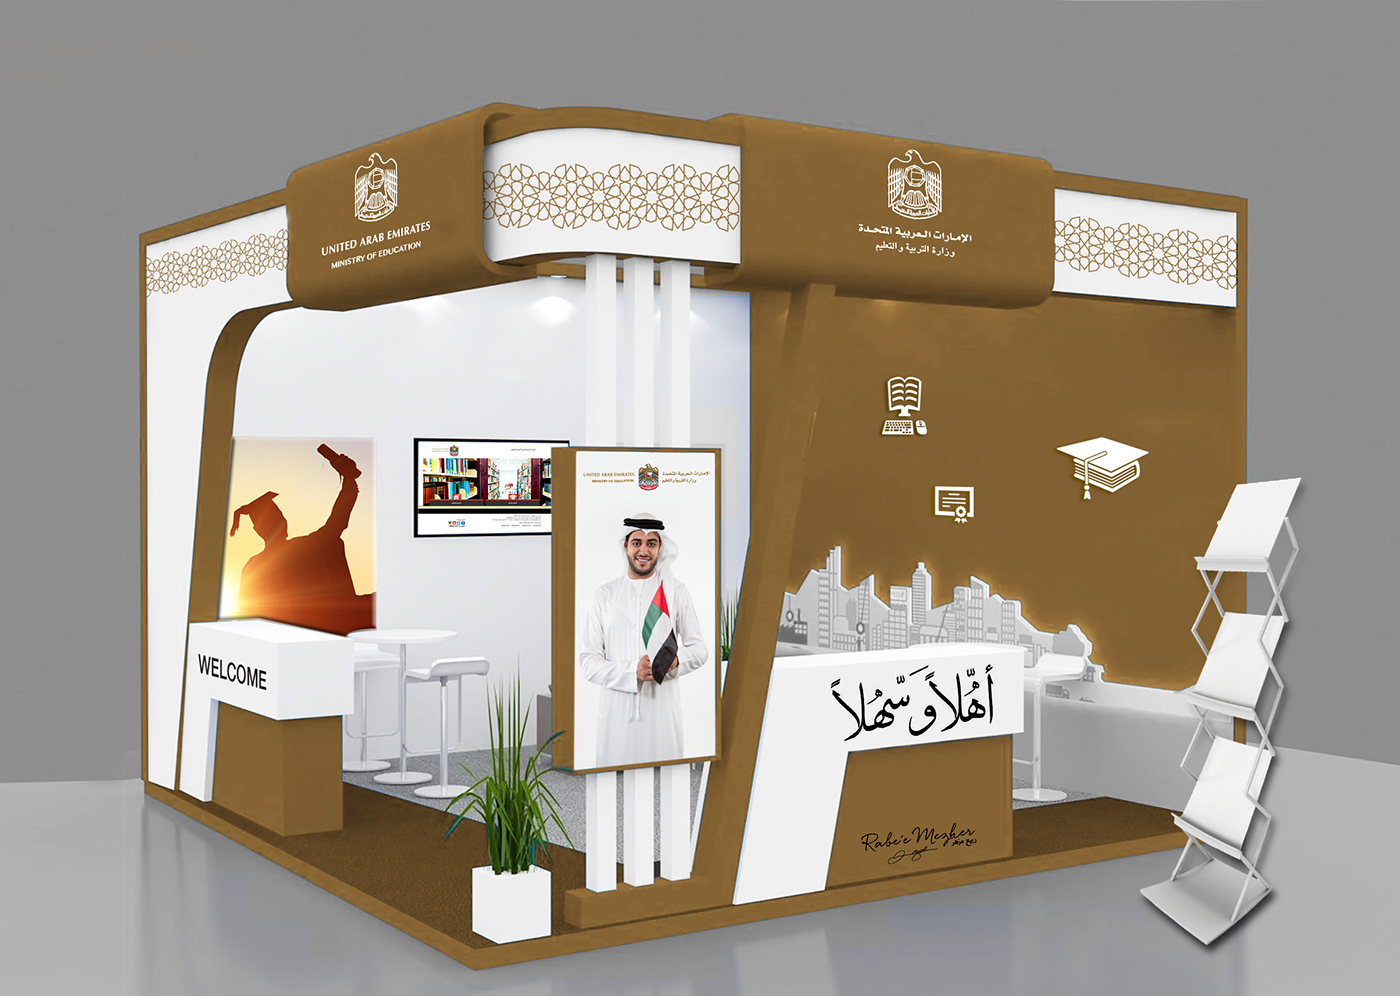 Ministry of education United Arab Emirates " Exhibition Stand Design " " 2017 © All Rights Reserved " #Design #love #rabee_mezher